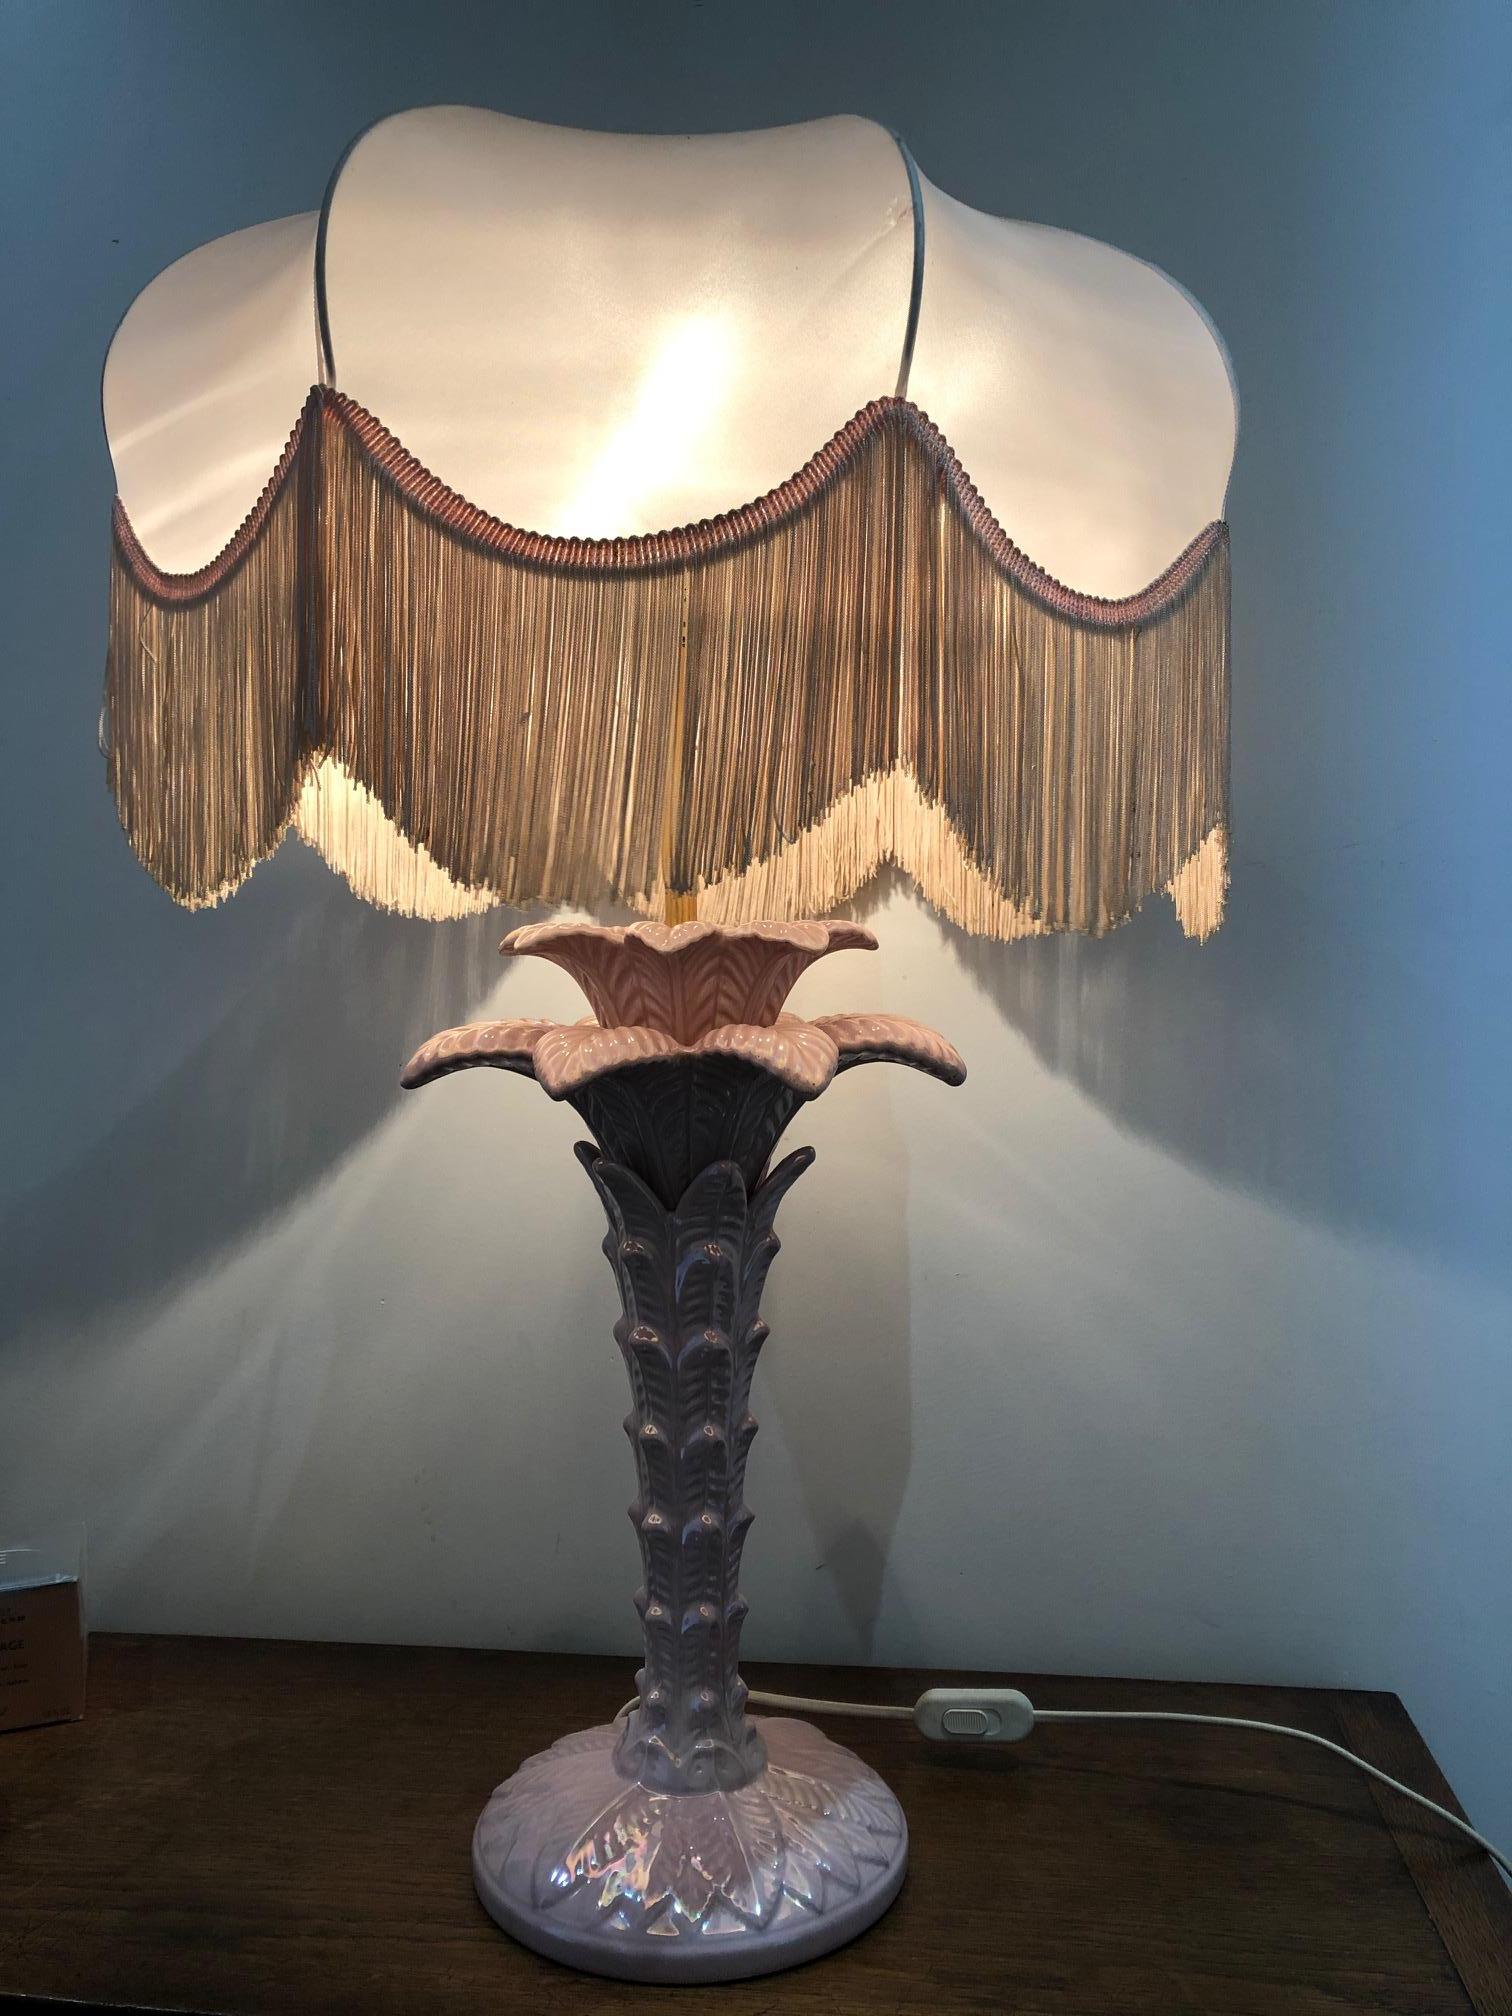 Bohemian style table lamp in glazed ceramic from the end of the 1970s
original shade with some rips.